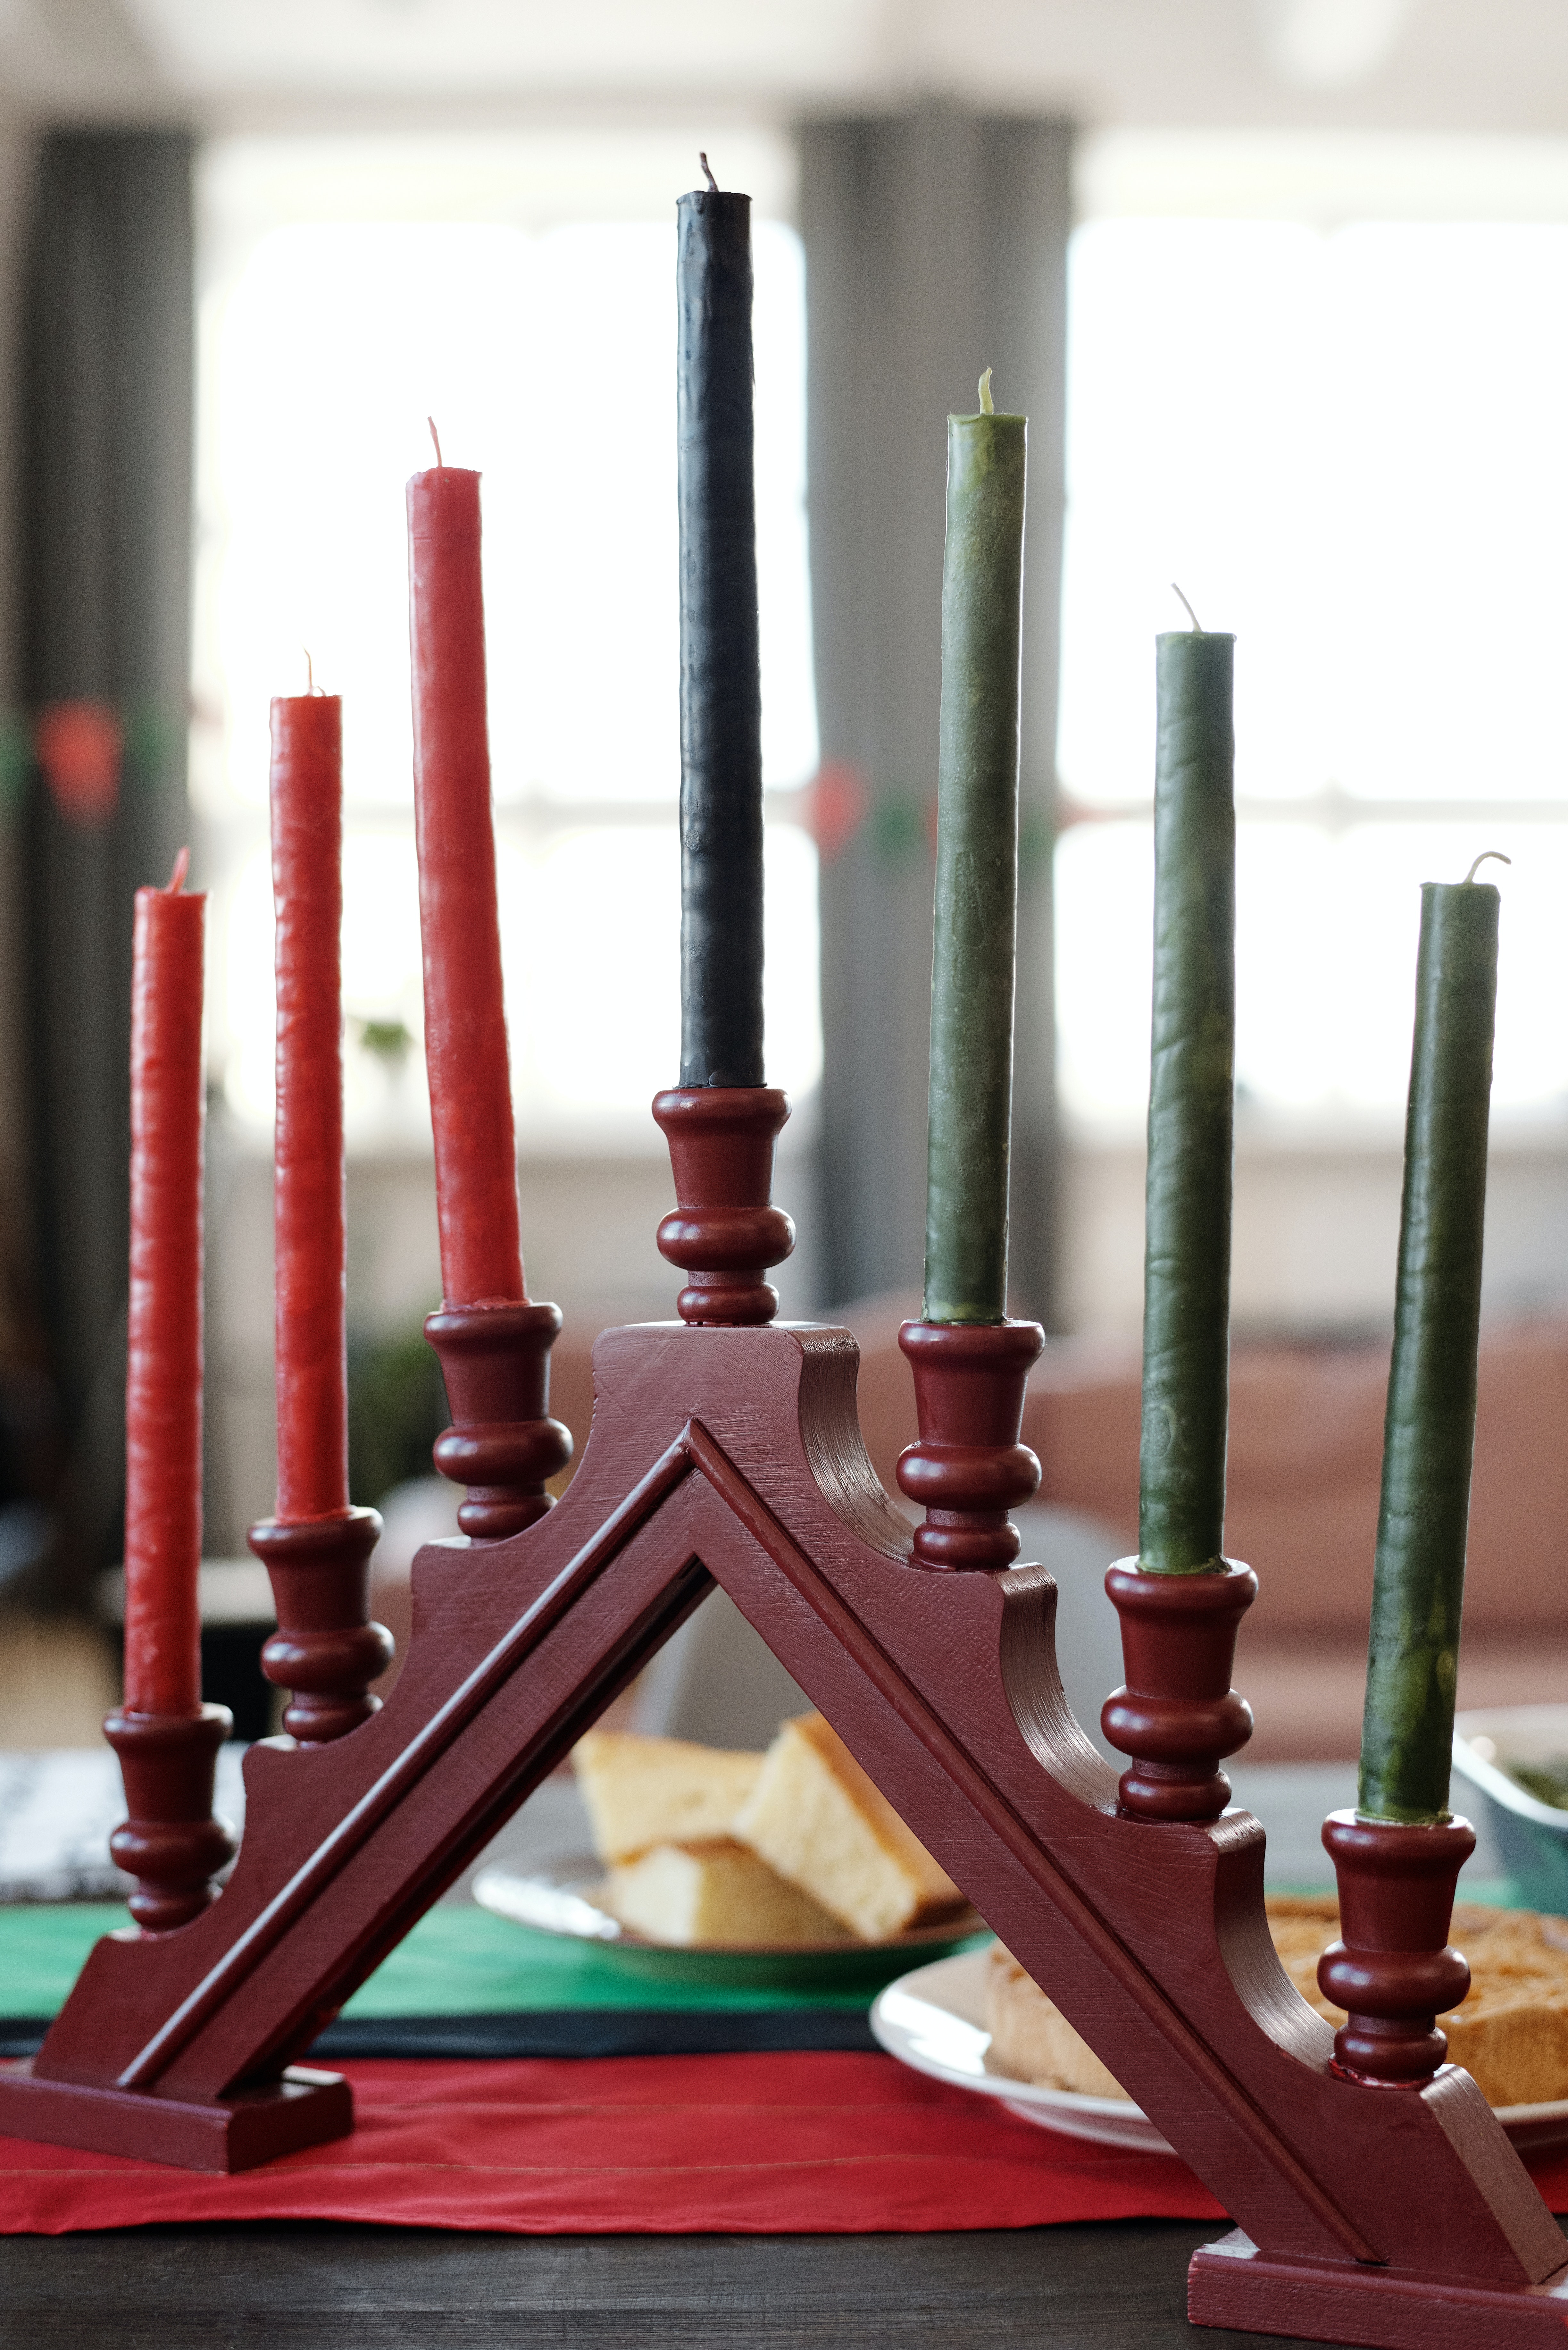 Photo of a wooden candelabra that is painted red. It has holders for seven candles and is shaped in an upward triangle so that the fourth (middle) candle is the highest, with the other candlesticks descending down to the base. The center candle is a black taper, while the three candles on the left are red tapers, and to the right are three green tapers. The holder sits on a table, with plates of food barely recognizable in the background. In the far background are tall windows emitting daylight.